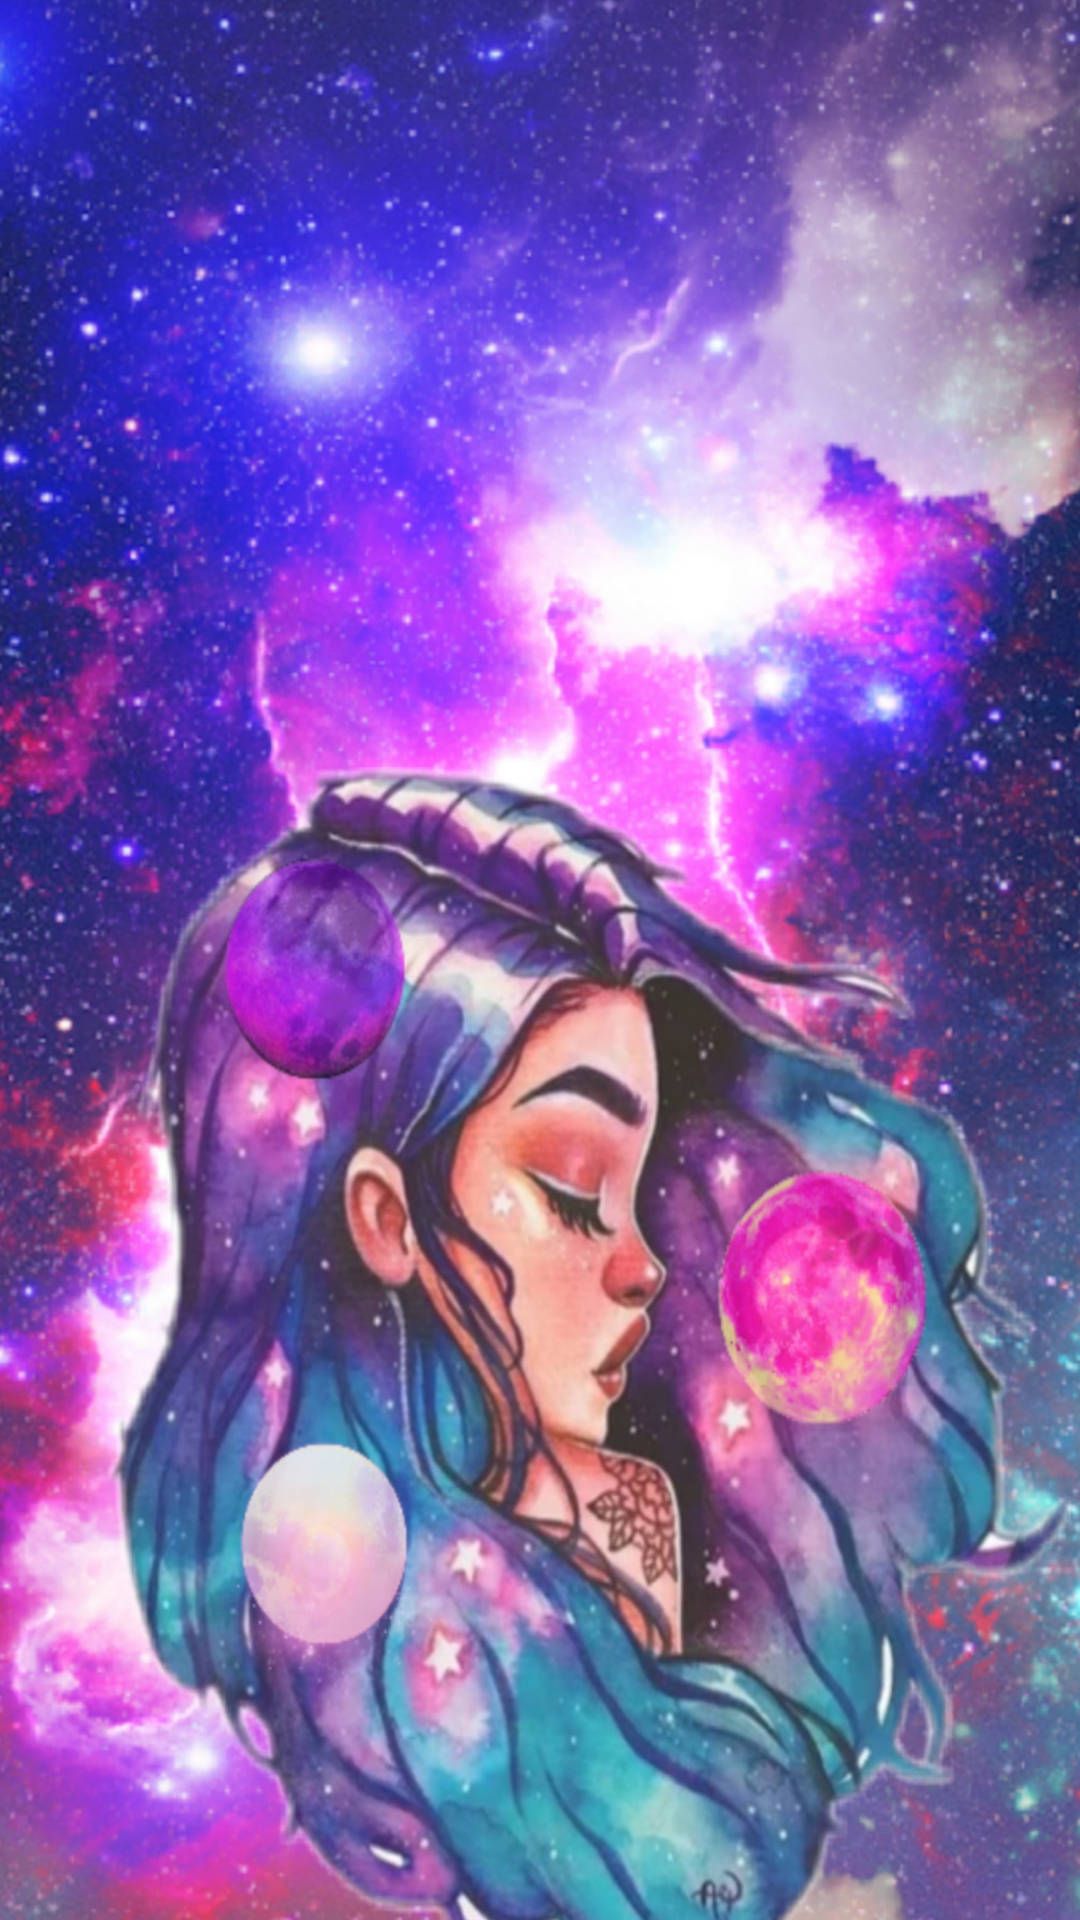 Share iphone aesthetic galaxy wallpaper latest